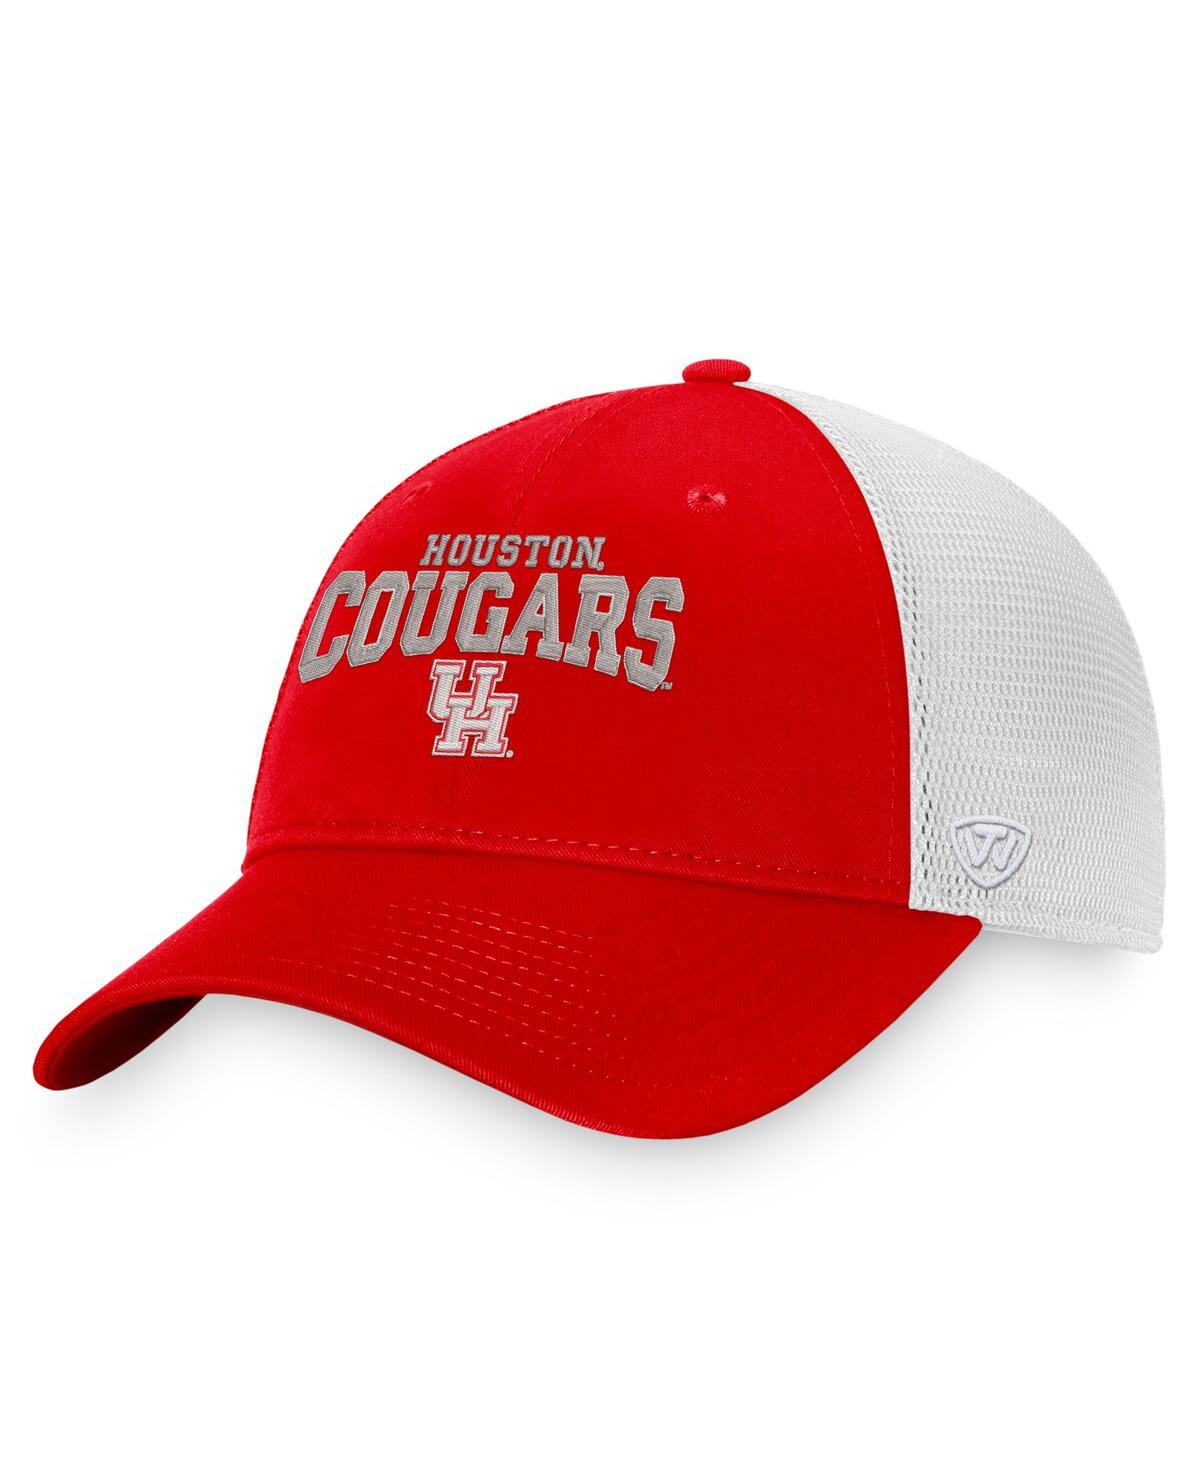 TOP OF THE WORLD MEN'S TOP OF THE WORLD RED HOUSTON COUGARS BREAKOUT TRUCKER SNAPBACK HAT